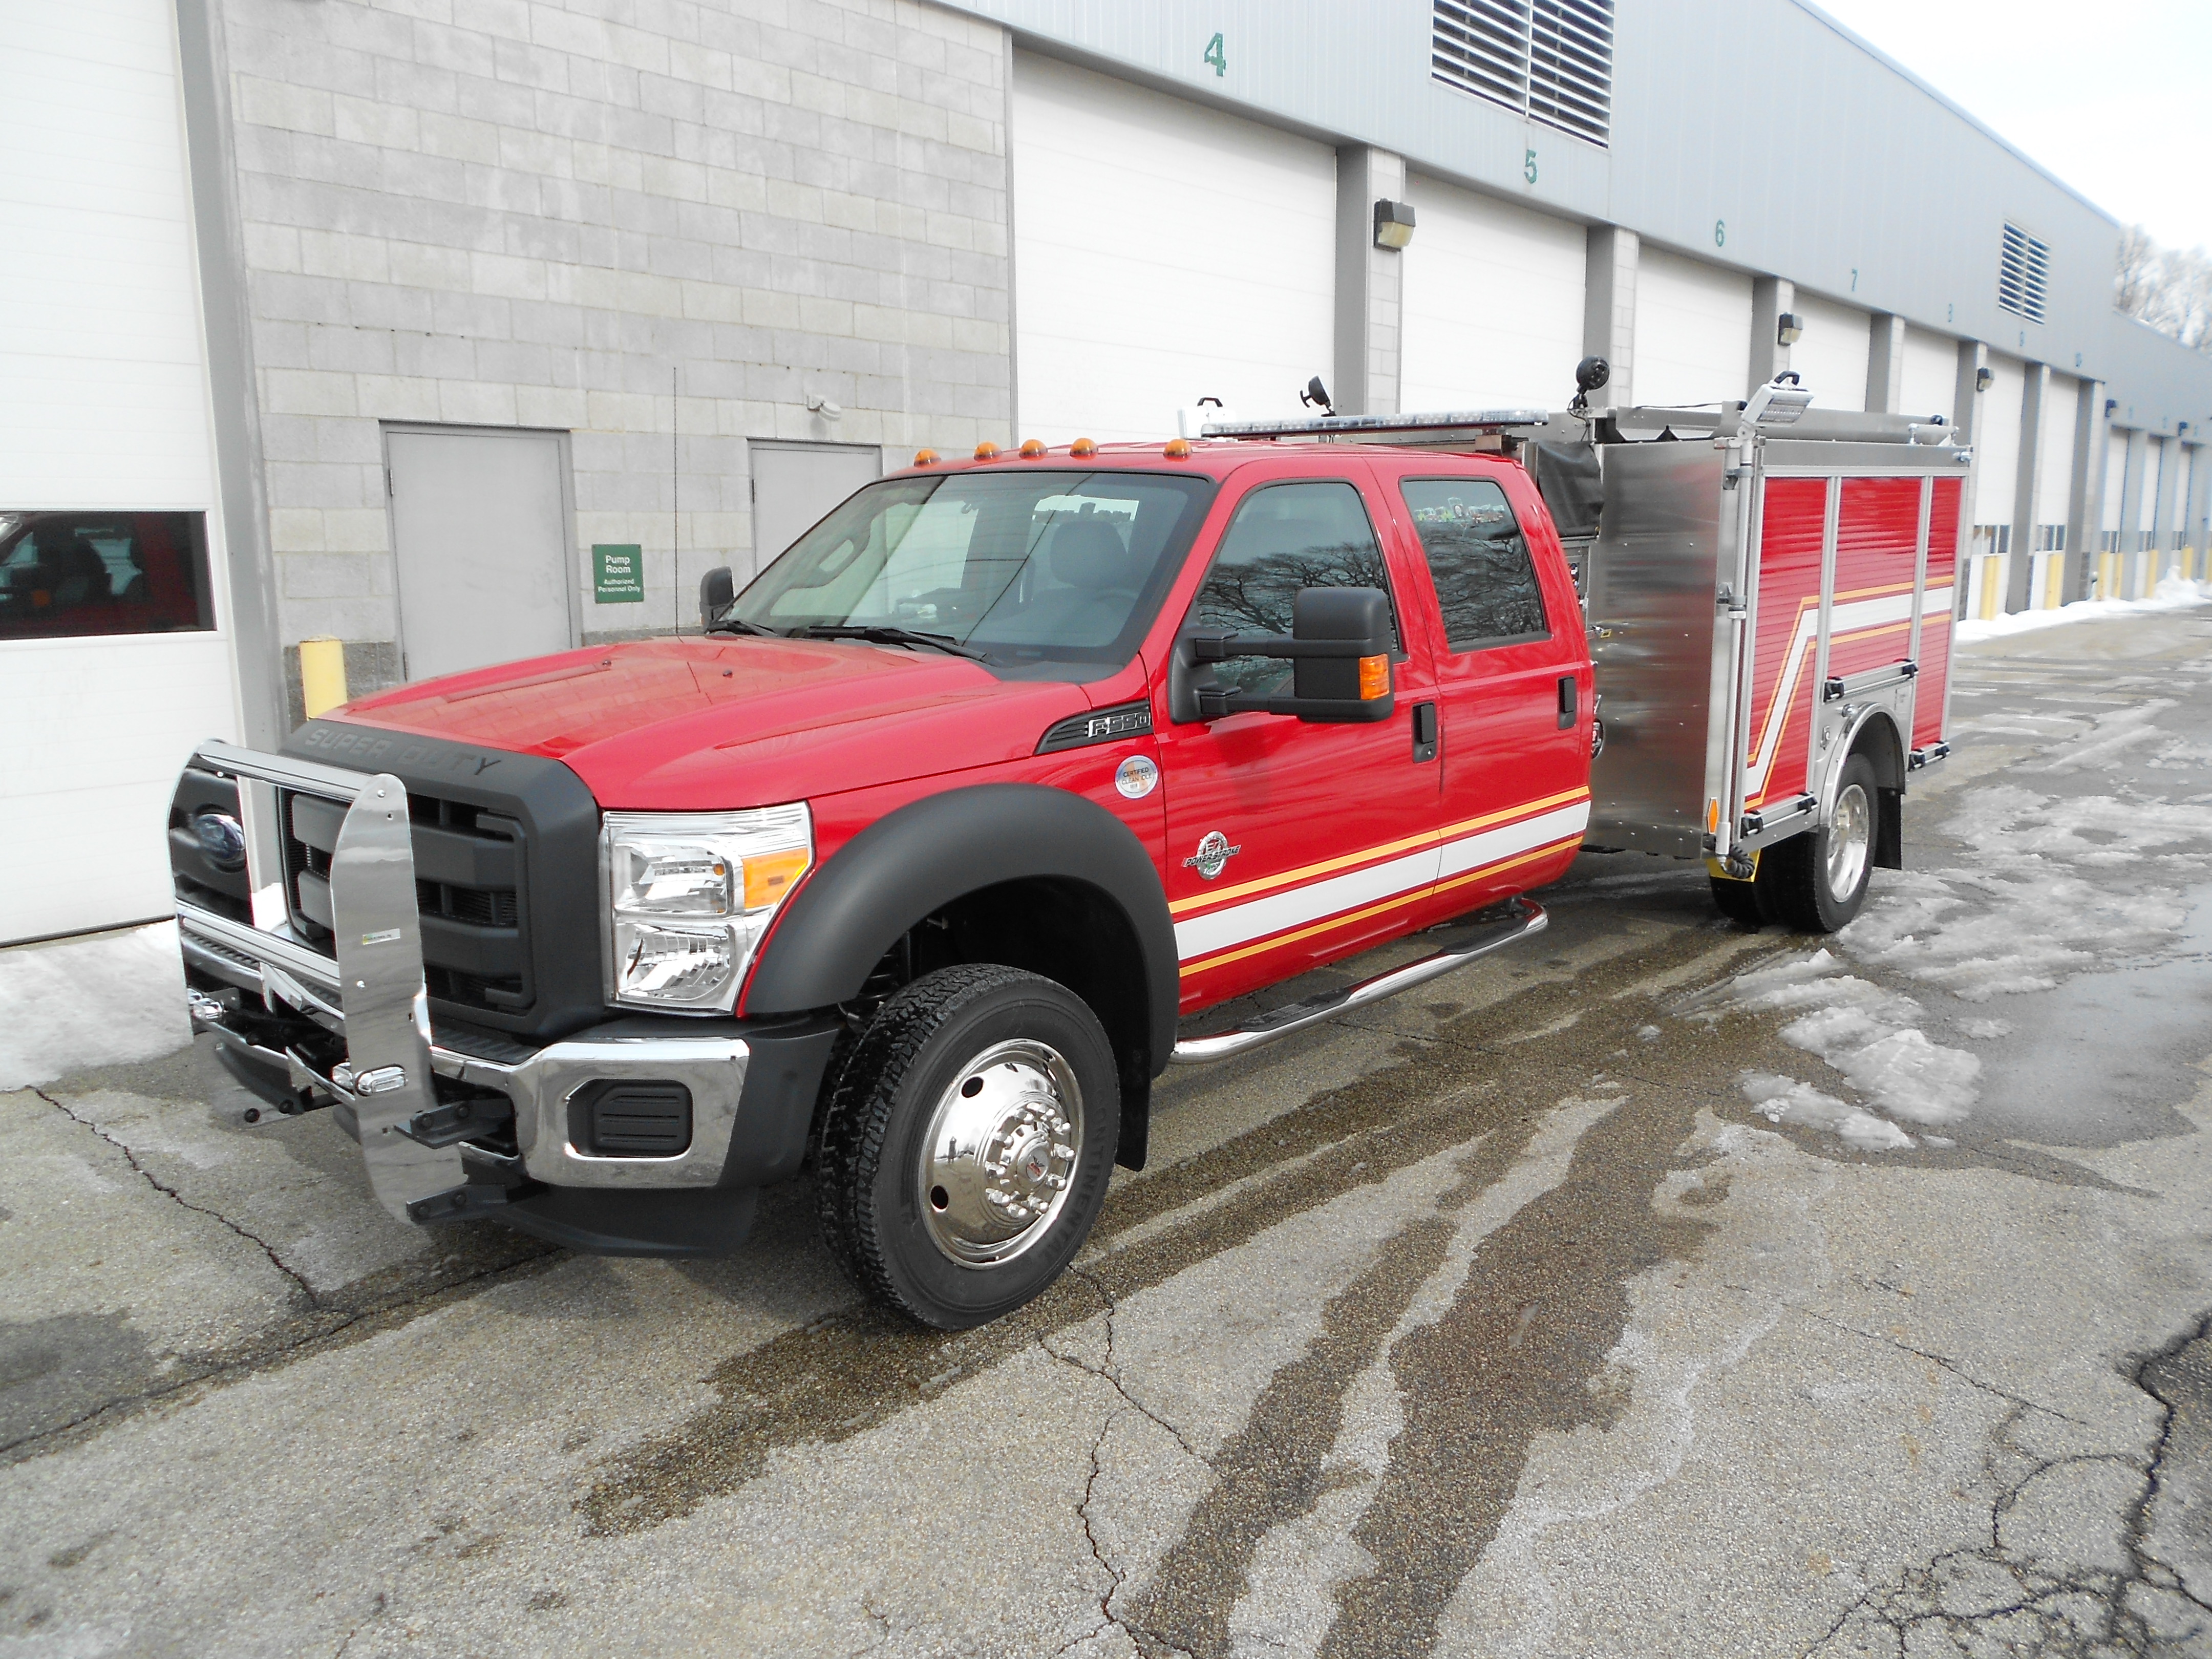 East Campbell Fire Department, NY – #22553